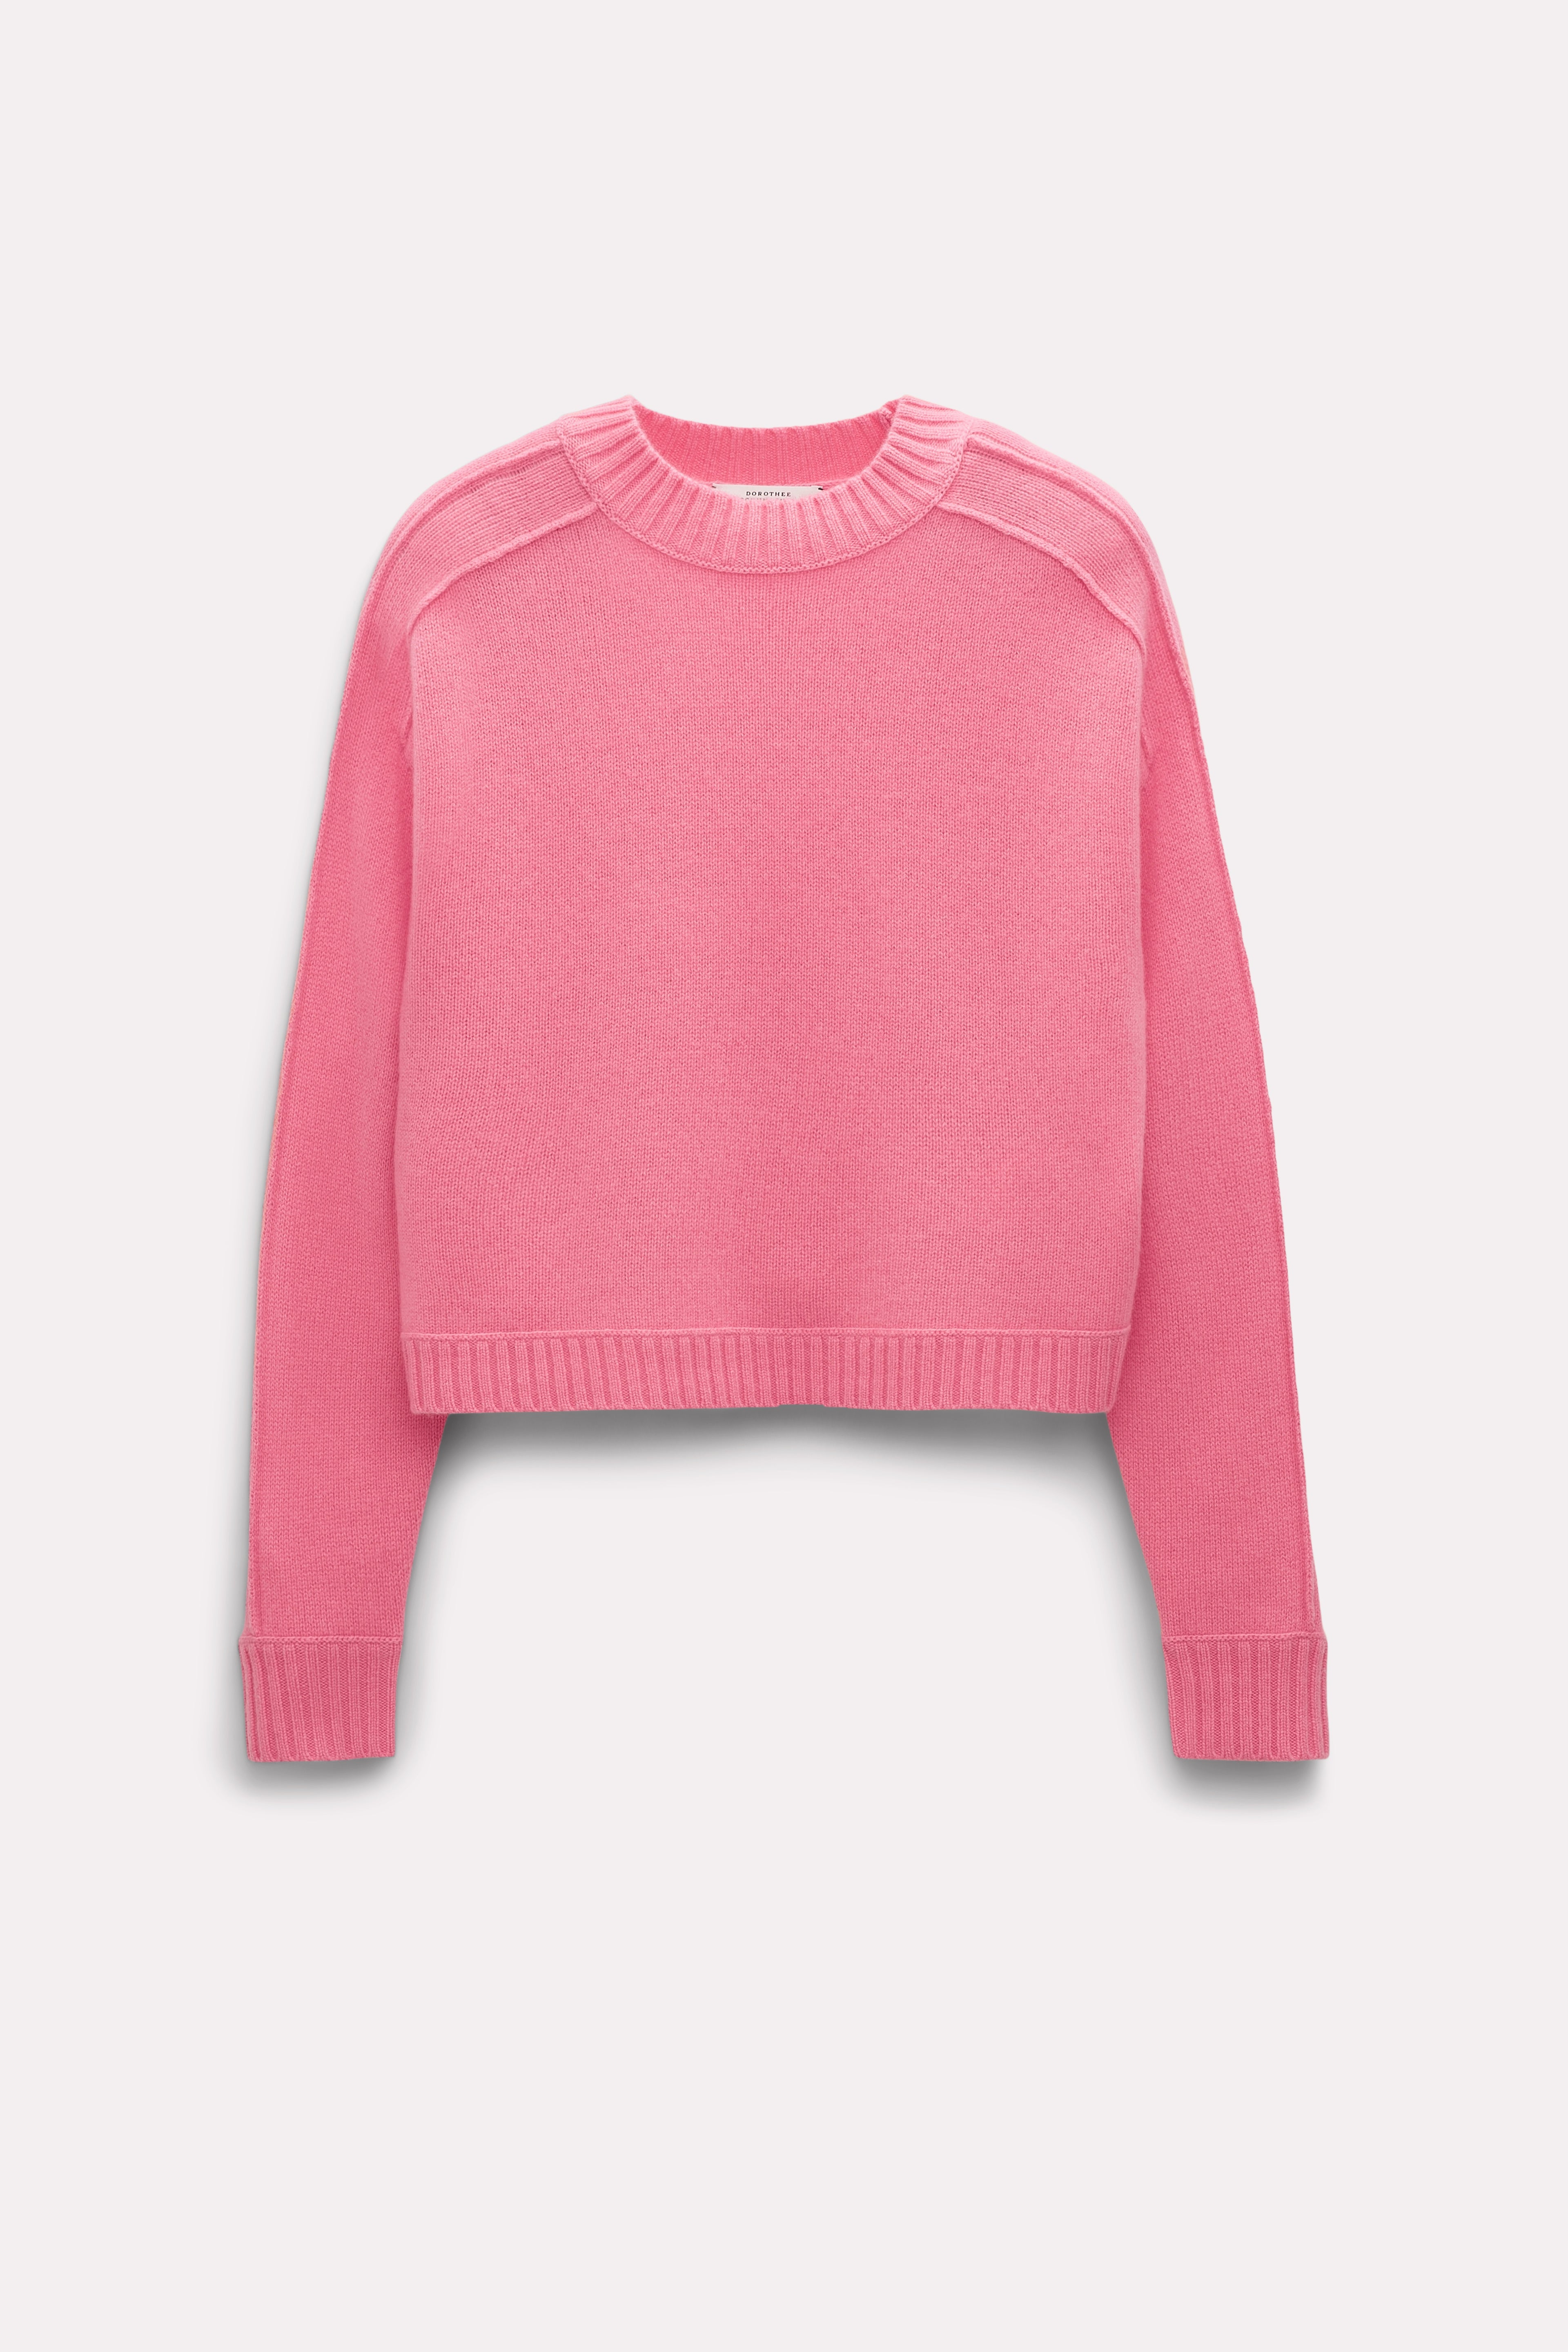 Dorothee-Schumacher-OUTLET-SALE-MODERN-STATEMENTS-pullover-Strick-ARCHIVE-COLLECTION.jpg